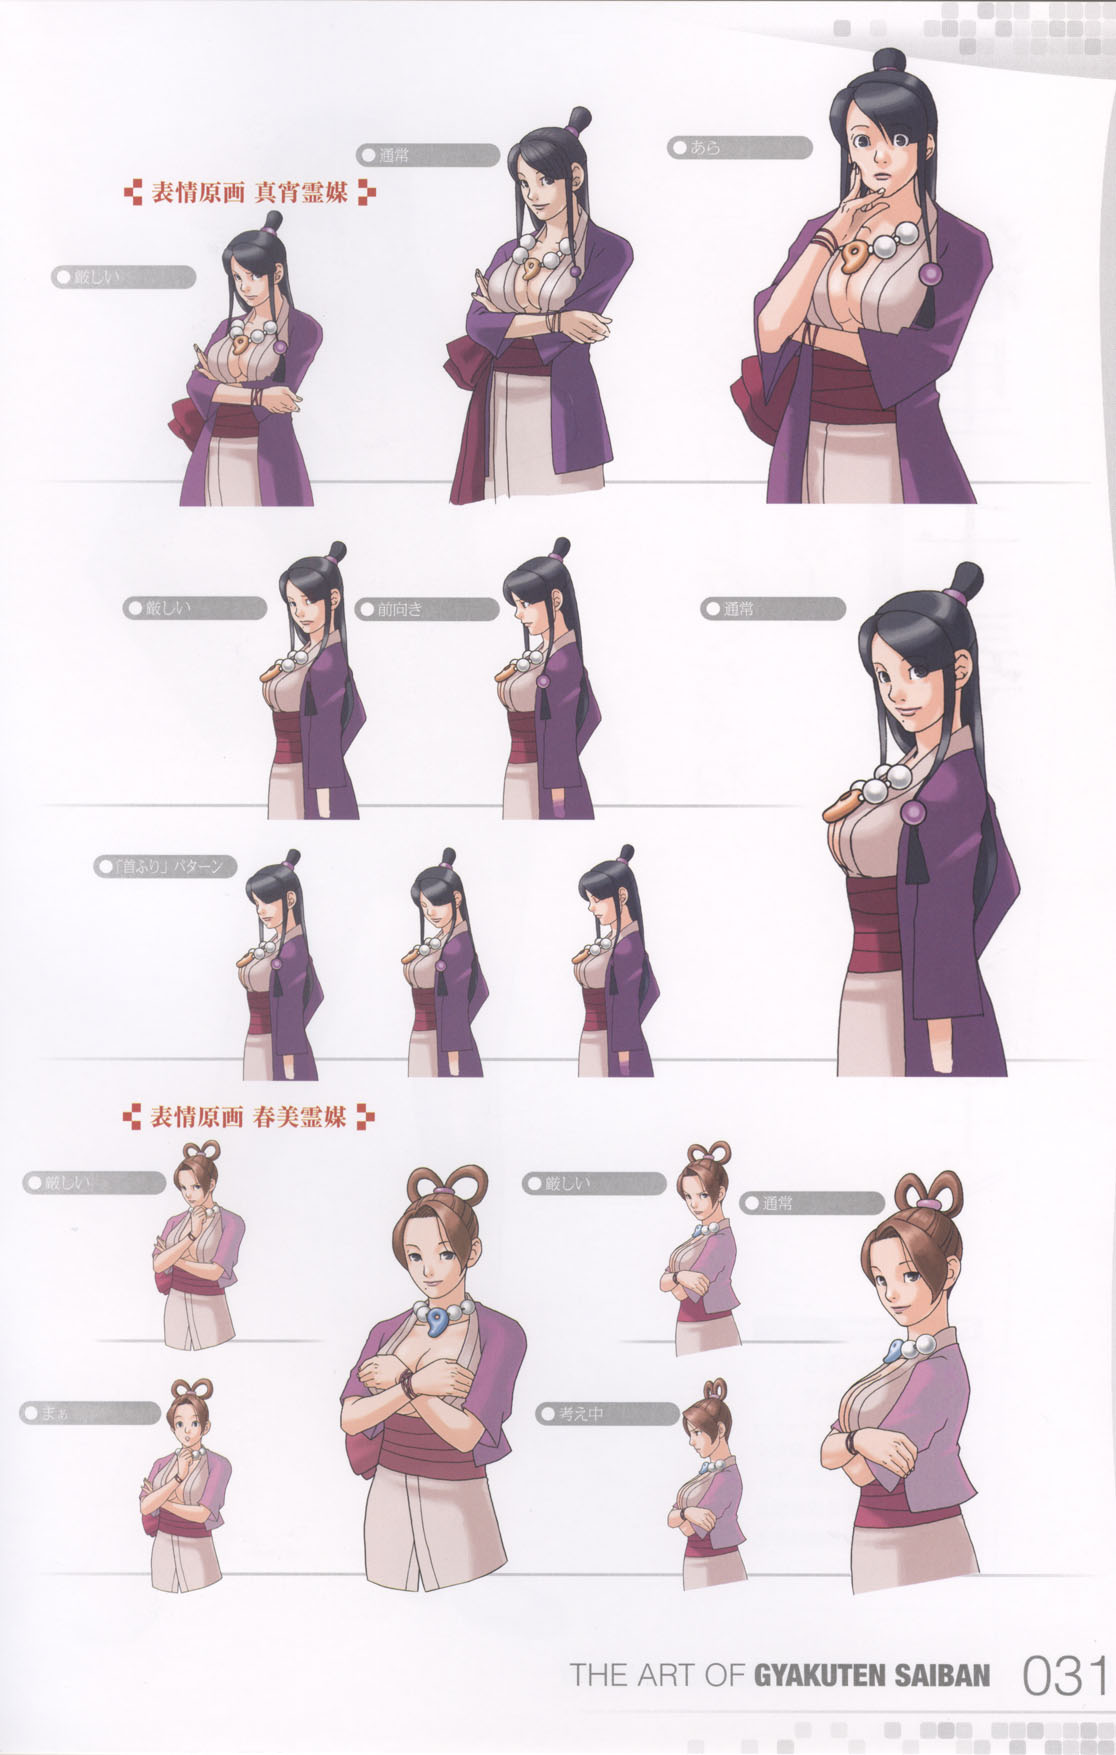 Ace Attorney Art Book Scans 46